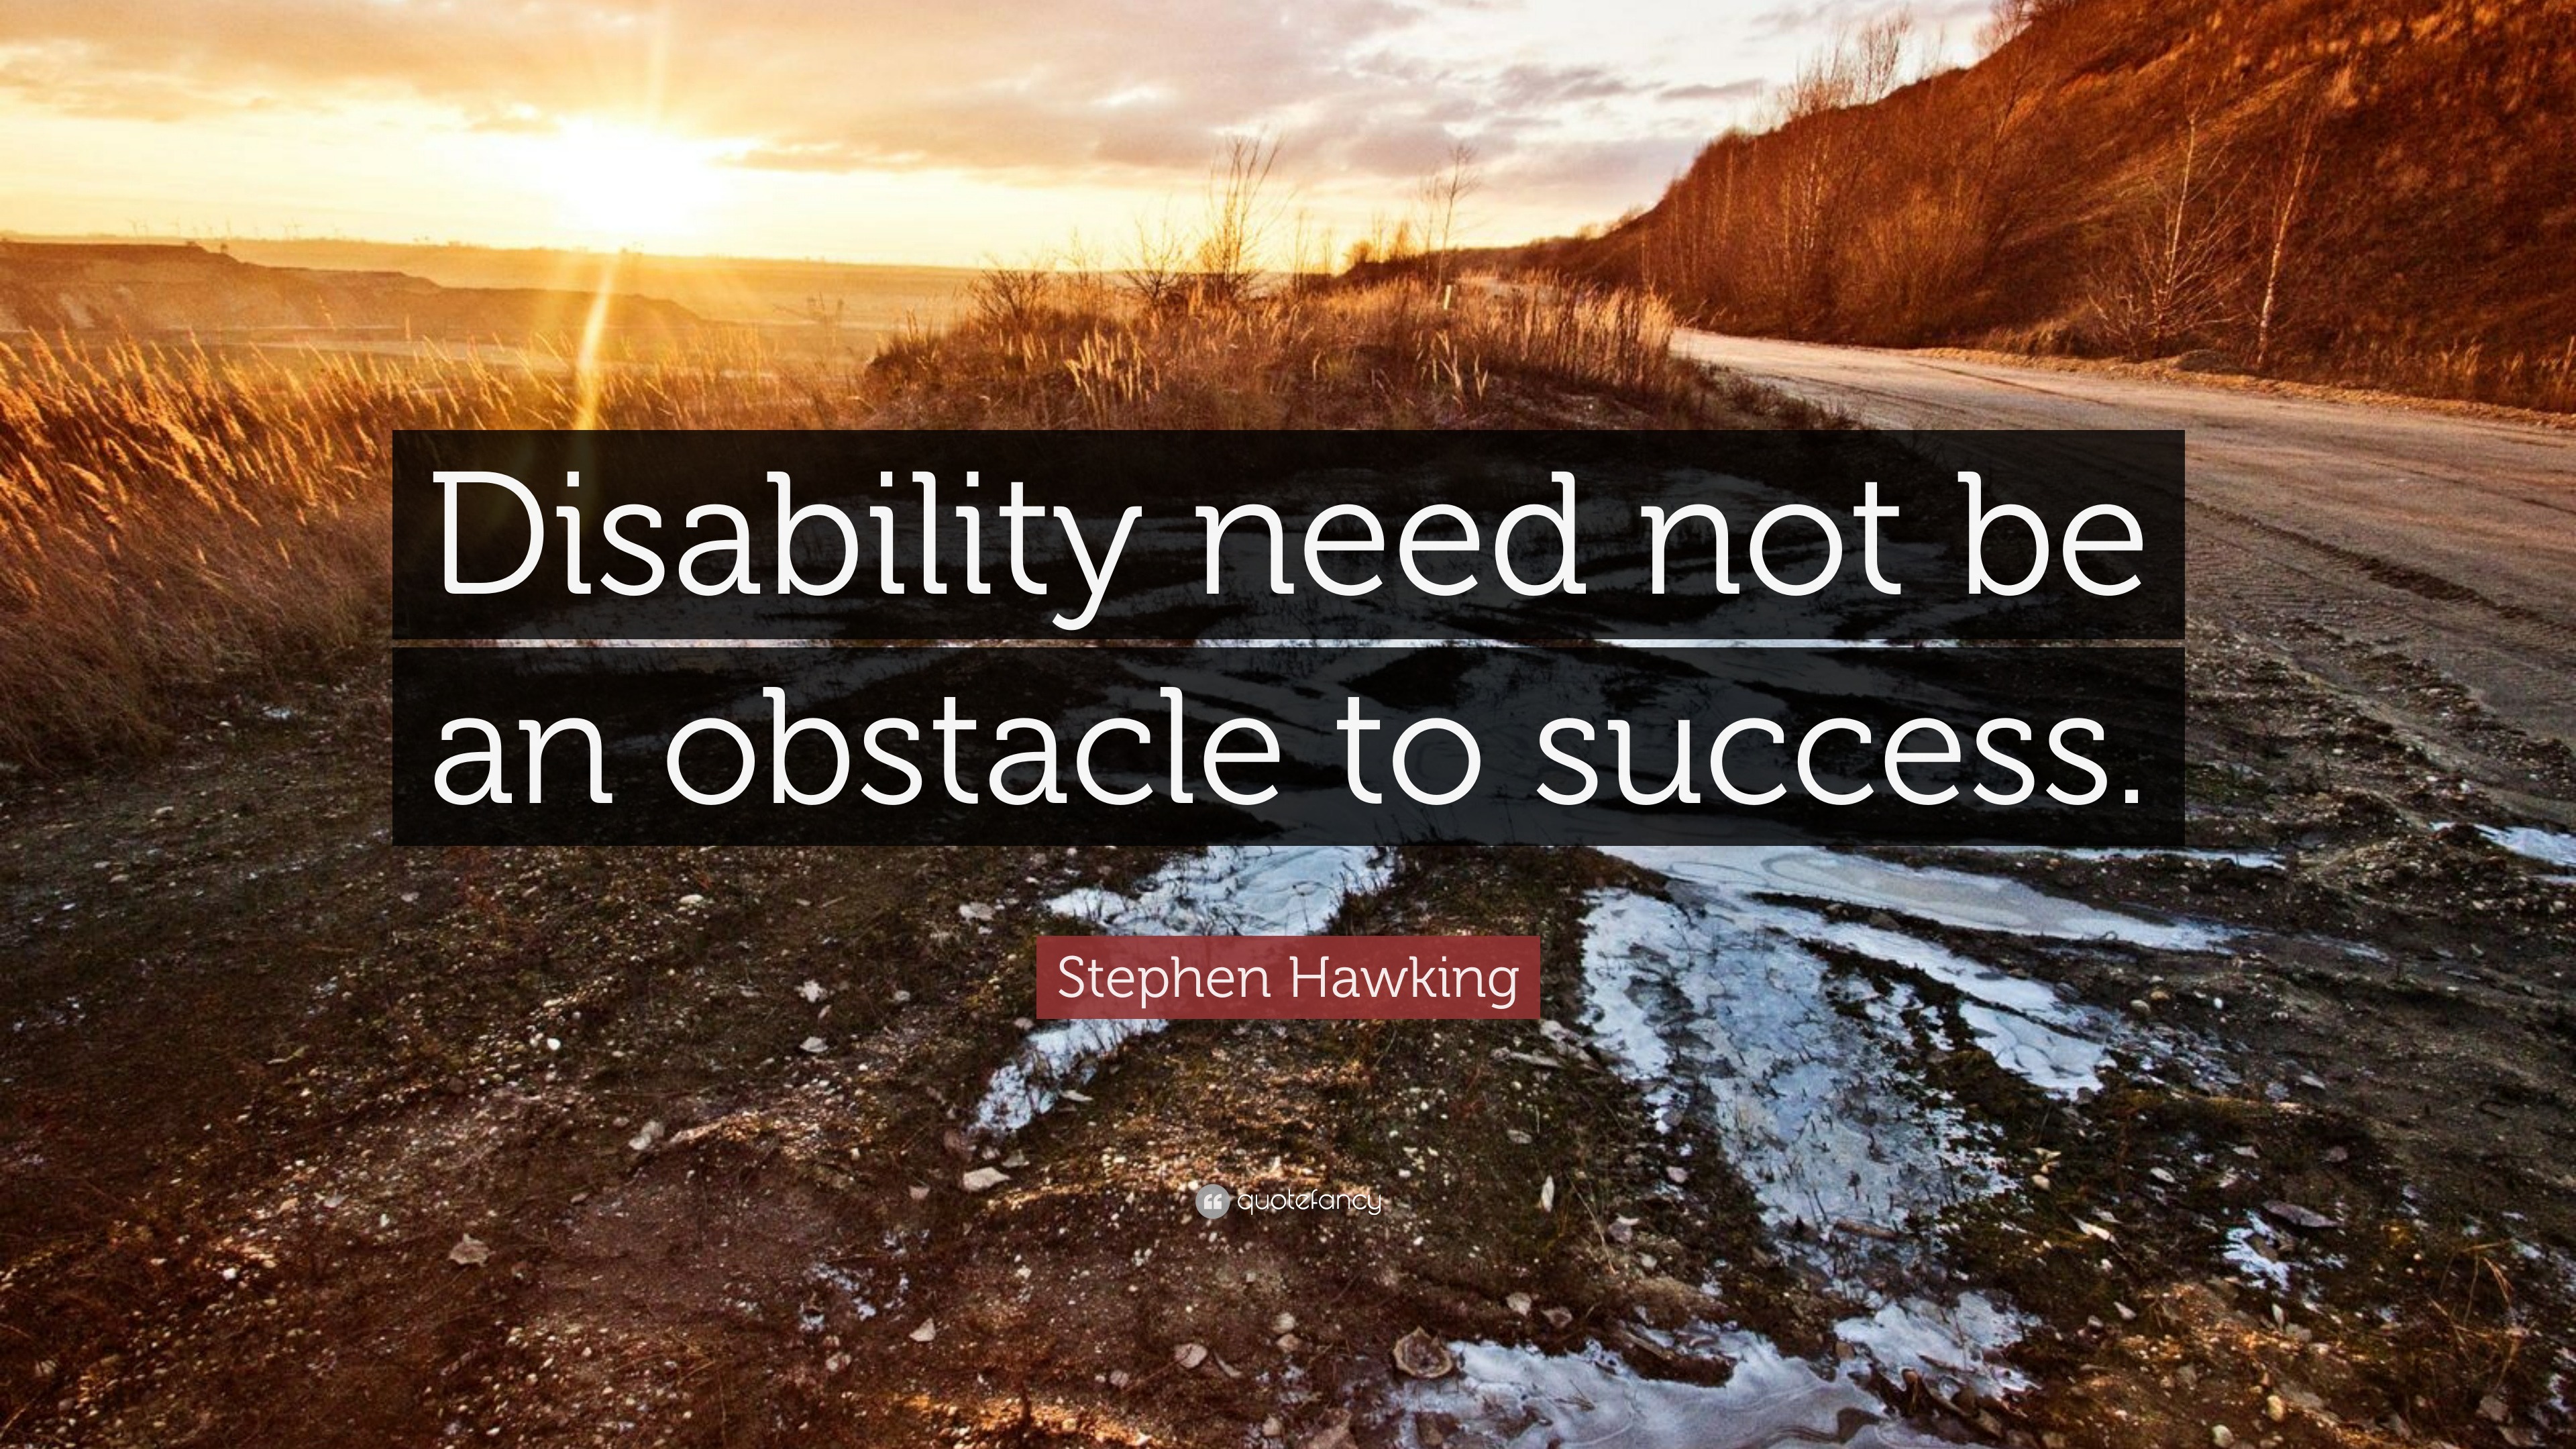 essay on disability is not an obstacle for success